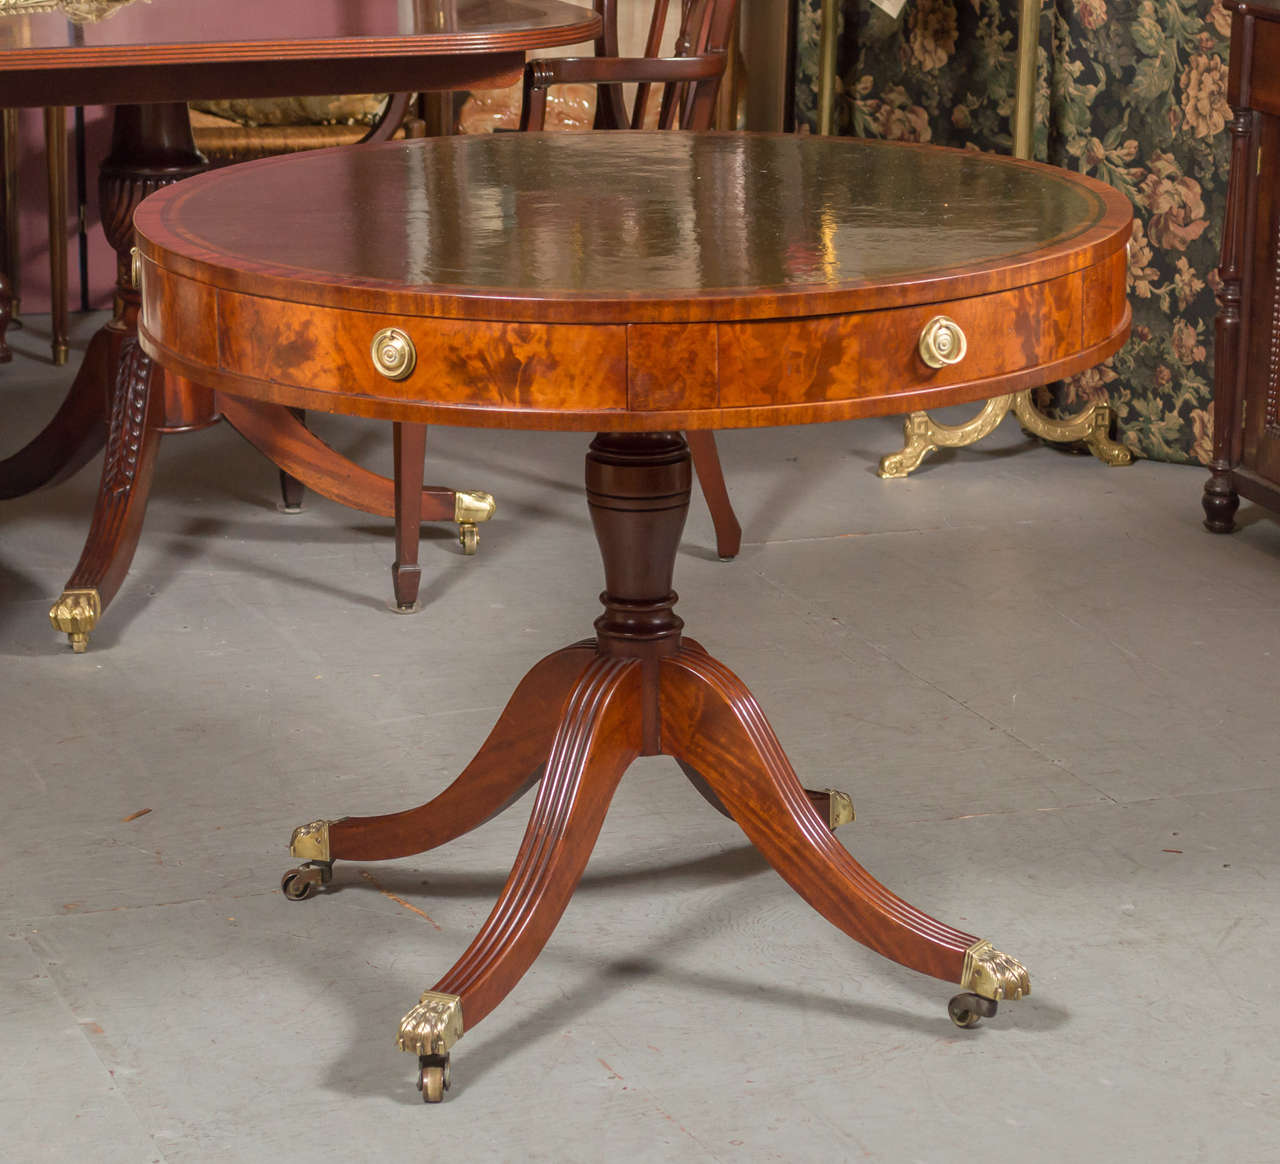 English drum table (also called a rent table), with swivel mechanize of the wooden collar type. With tooled Black leather surface, and two drawers and two dummy drawer (alternating), graceful reeded down swept legs ending in Brass claw feet on